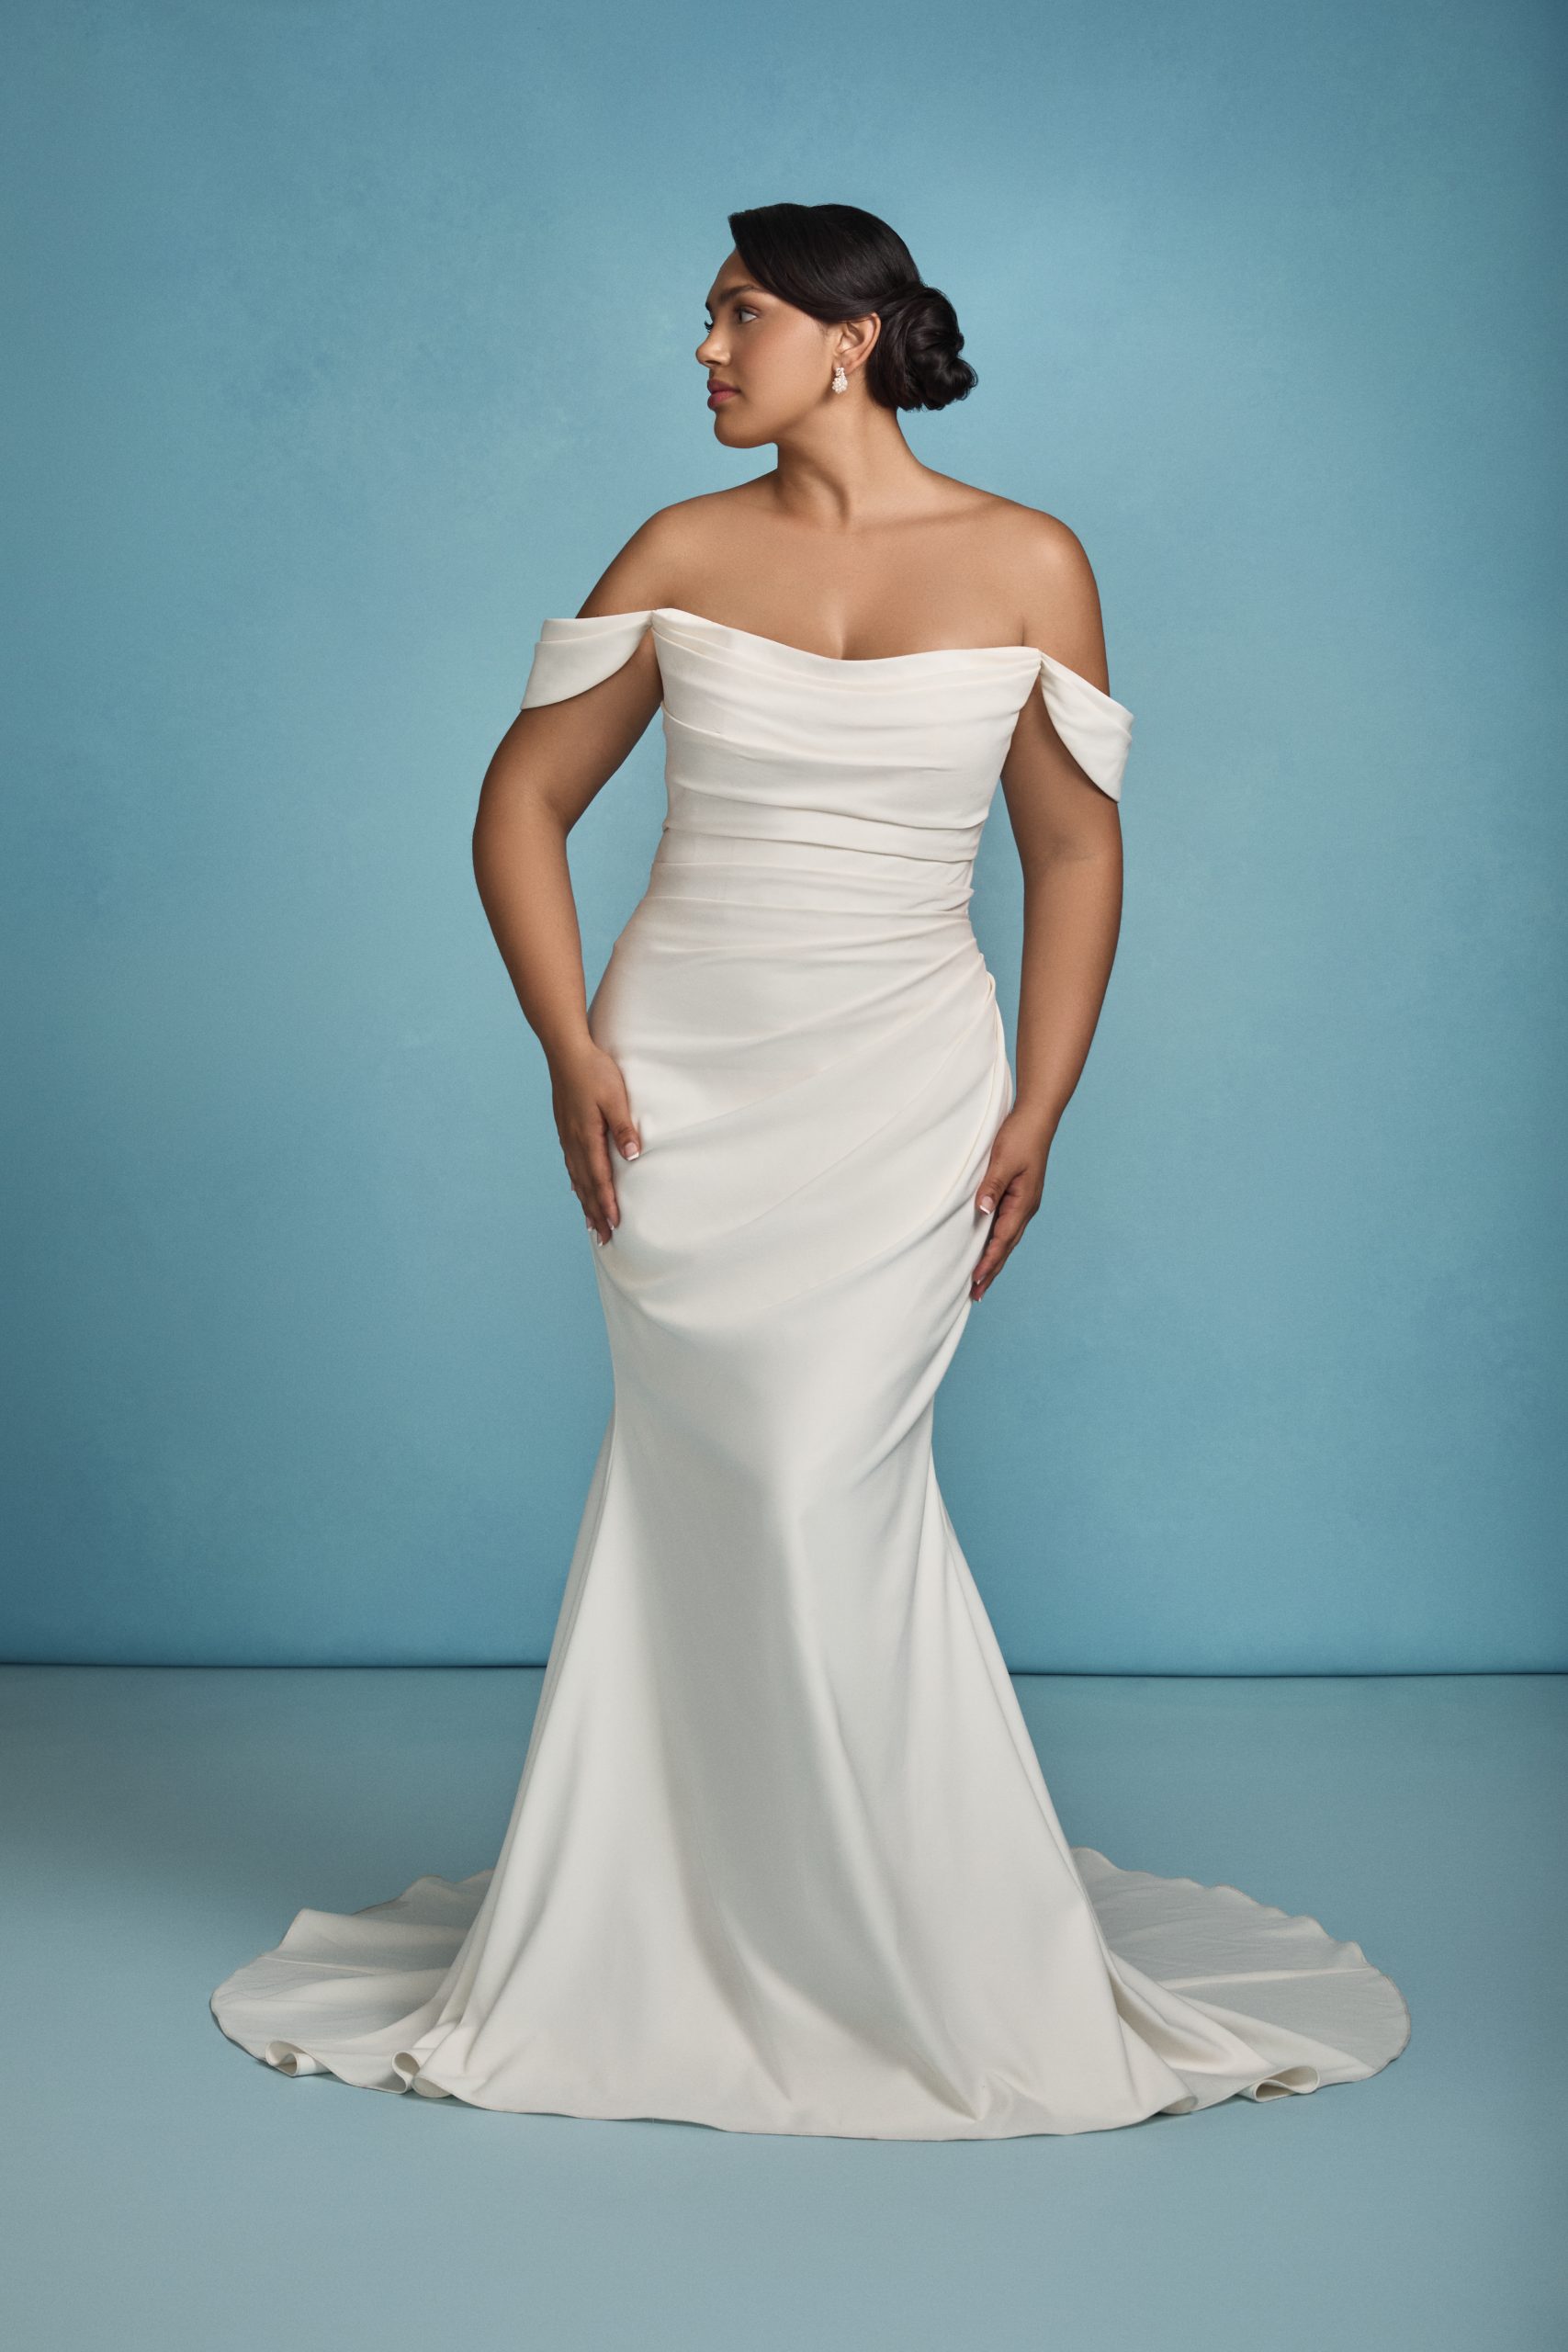 Timeless Off-the-Shoulder Fit-and-Flare Wedding Dress With Buttons by Anne Barge - Image 1